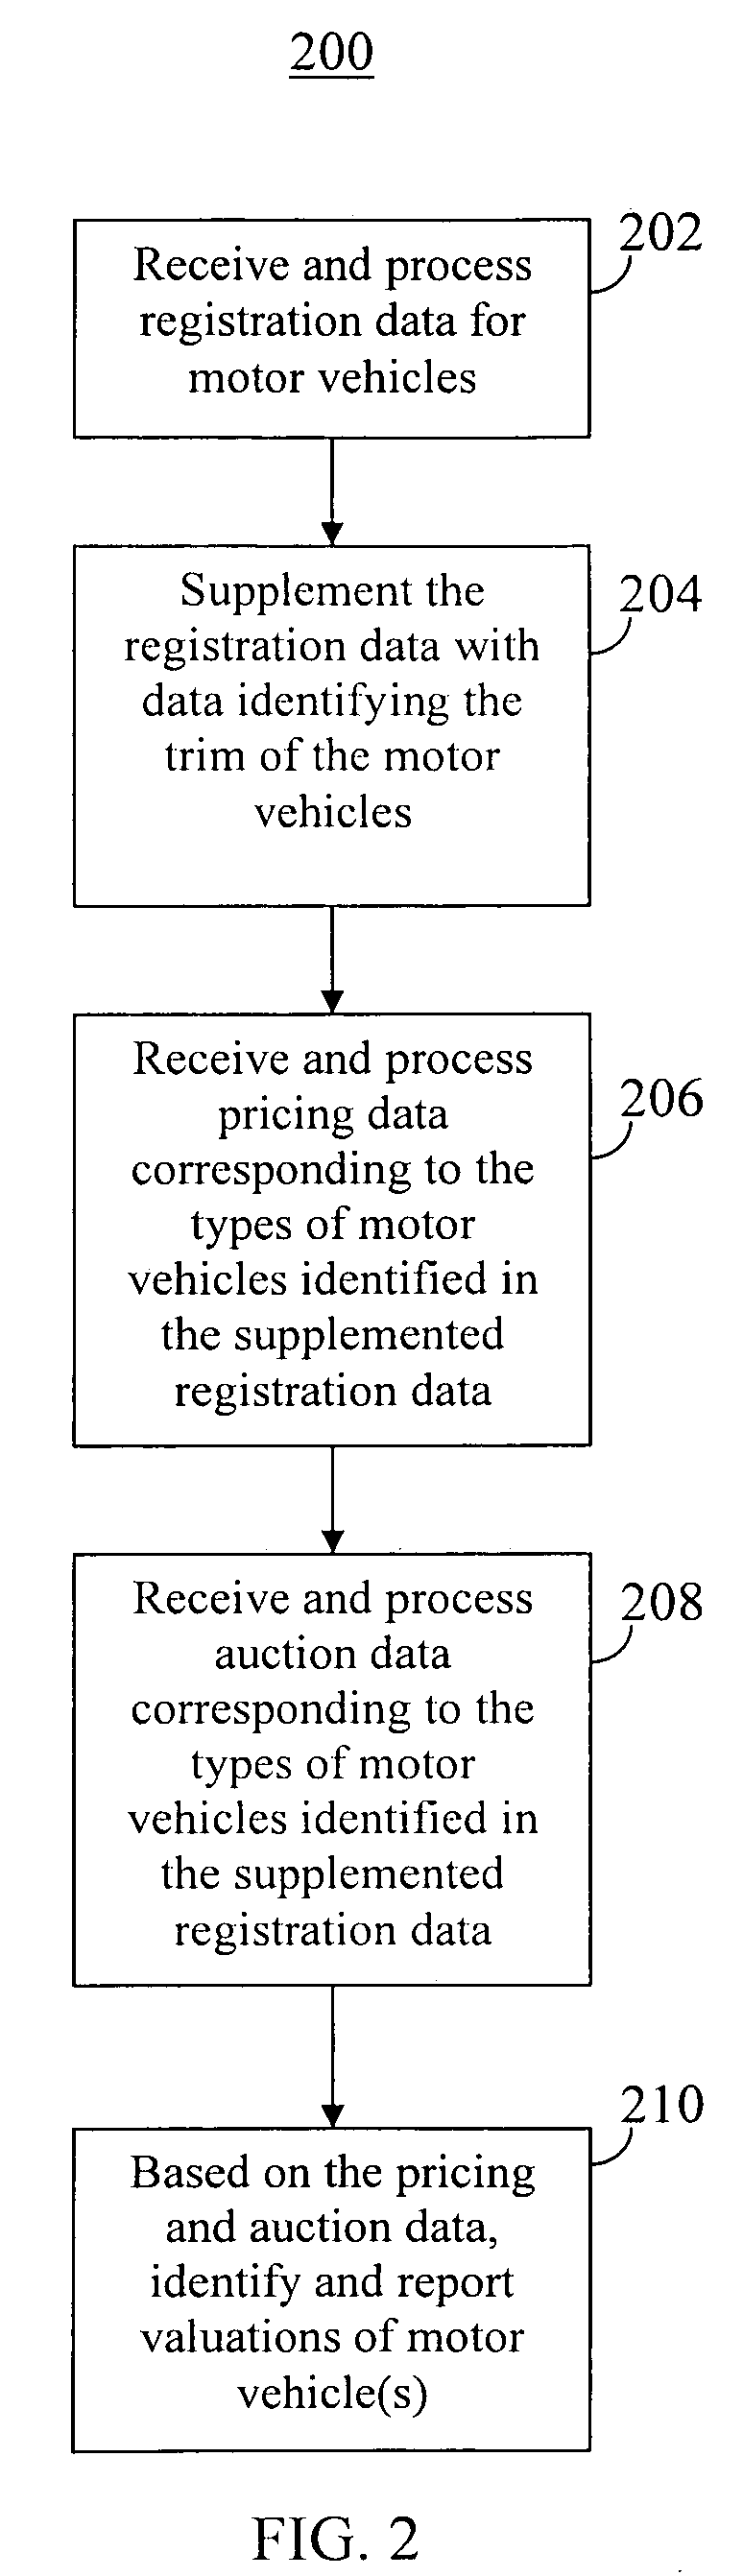 Motor vehicle valuation system and method with data filtering, analysis, and reporting capabilities